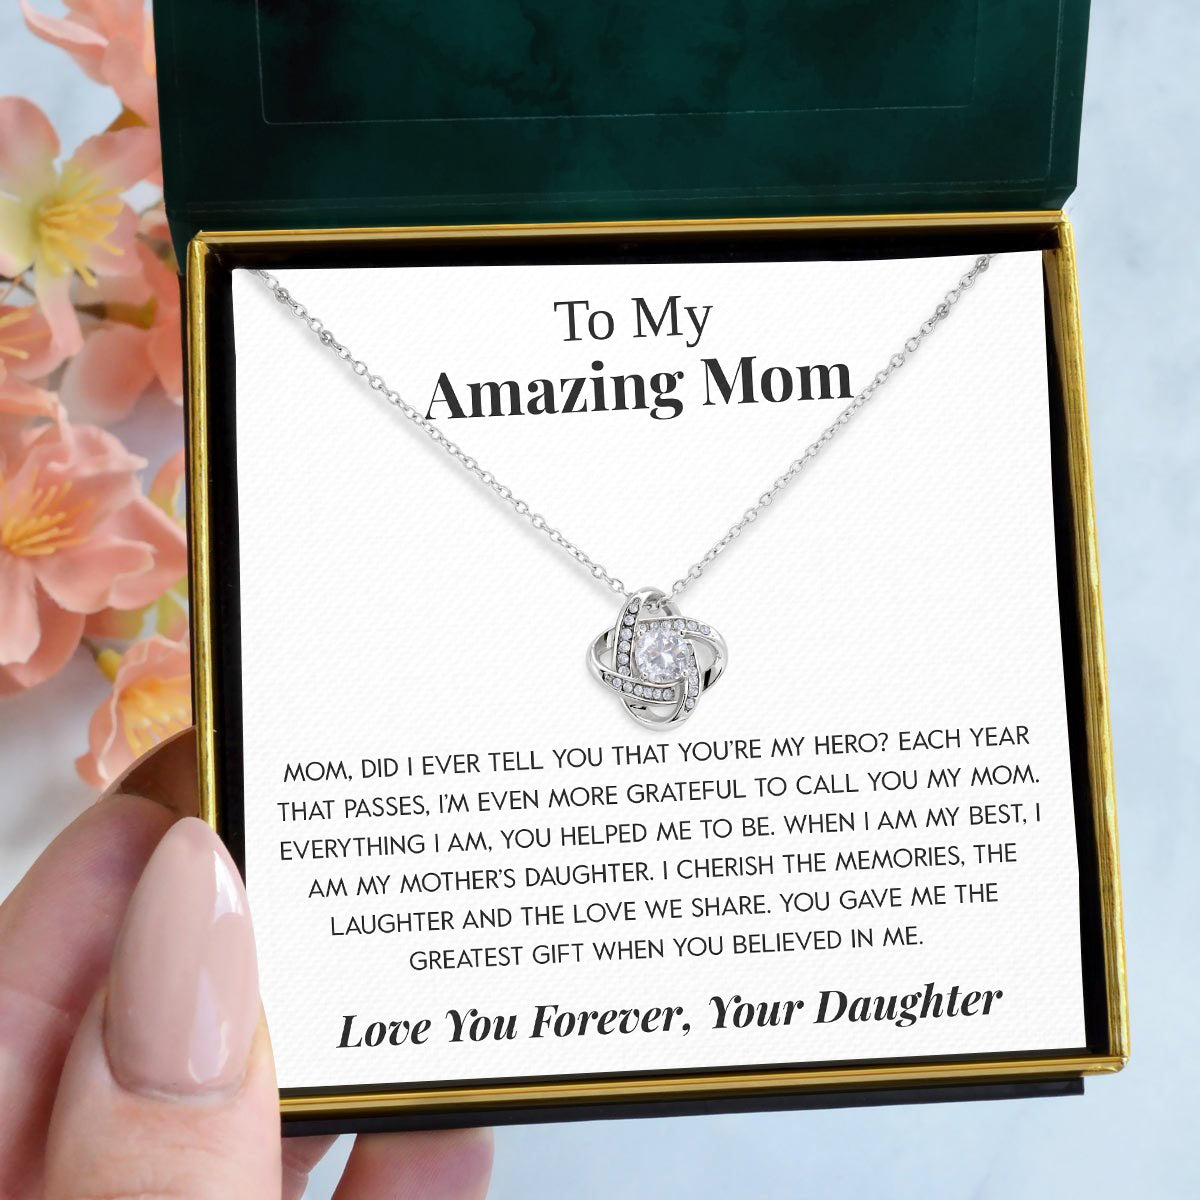 To My Amazing Mom | "Love You Forever" | Love Knot Necklace